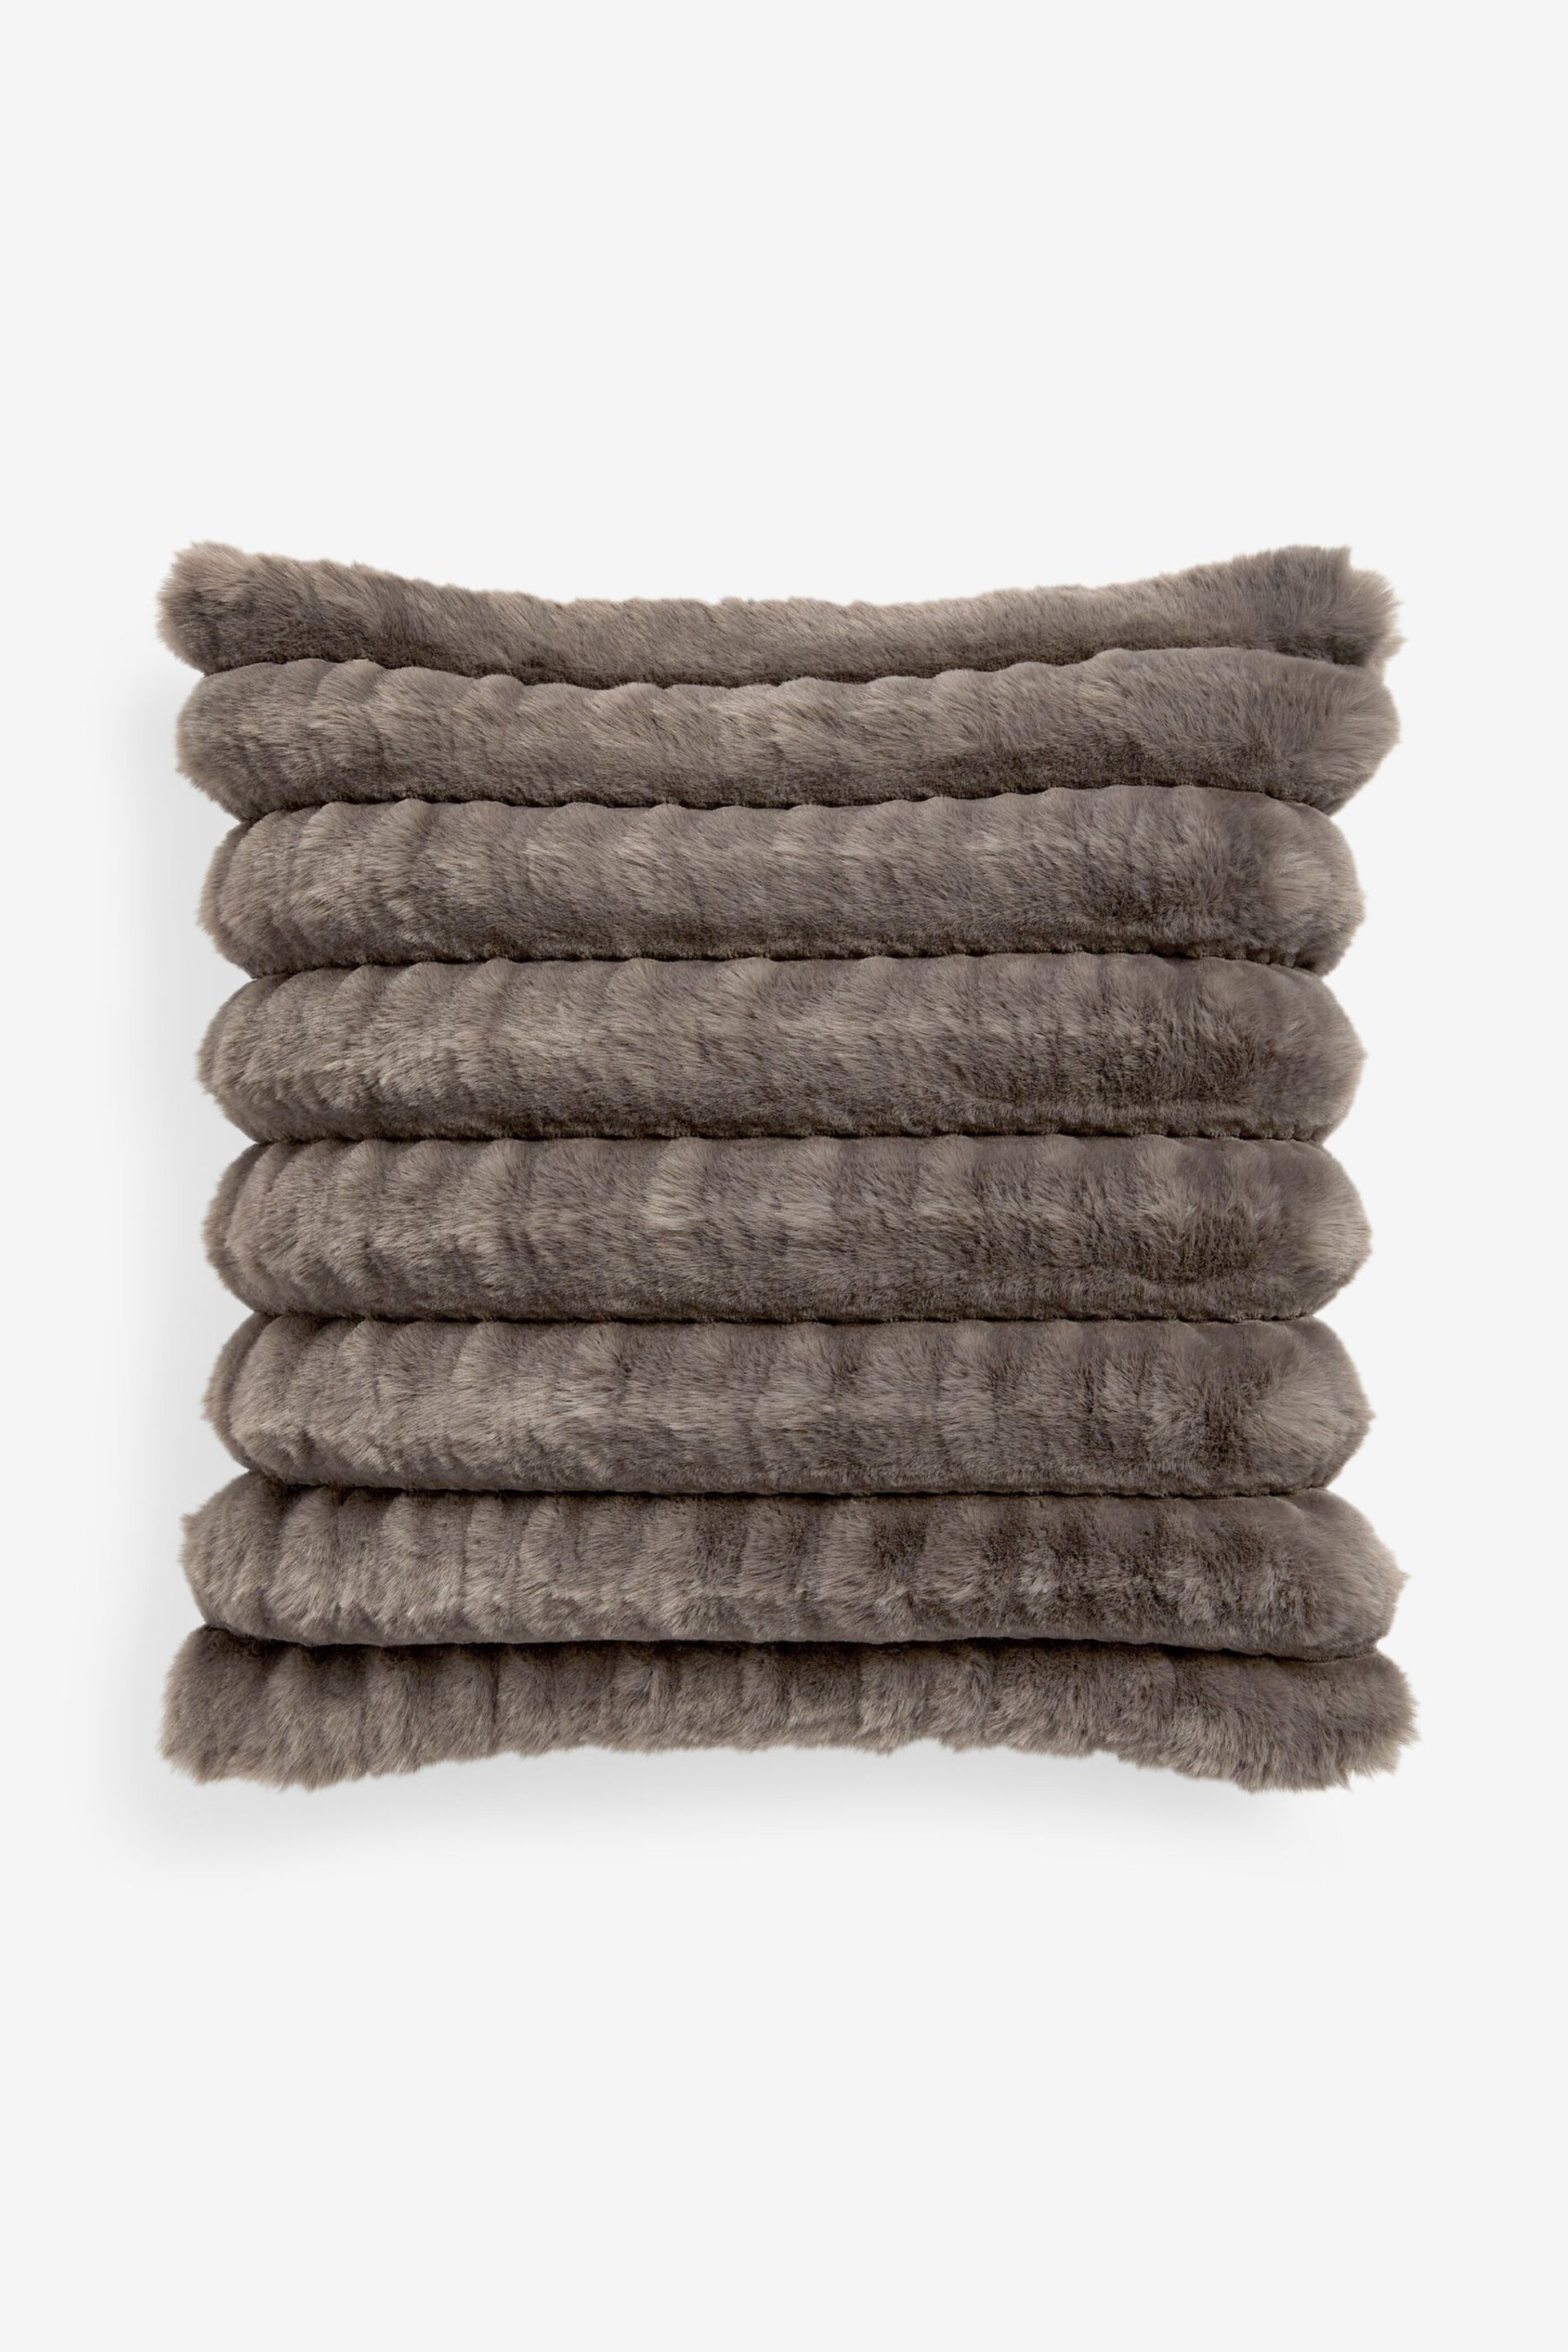 Charcoal Grey Coco Ruched Faux Fur 43 x 43cm Cushion - Image 6 of 6